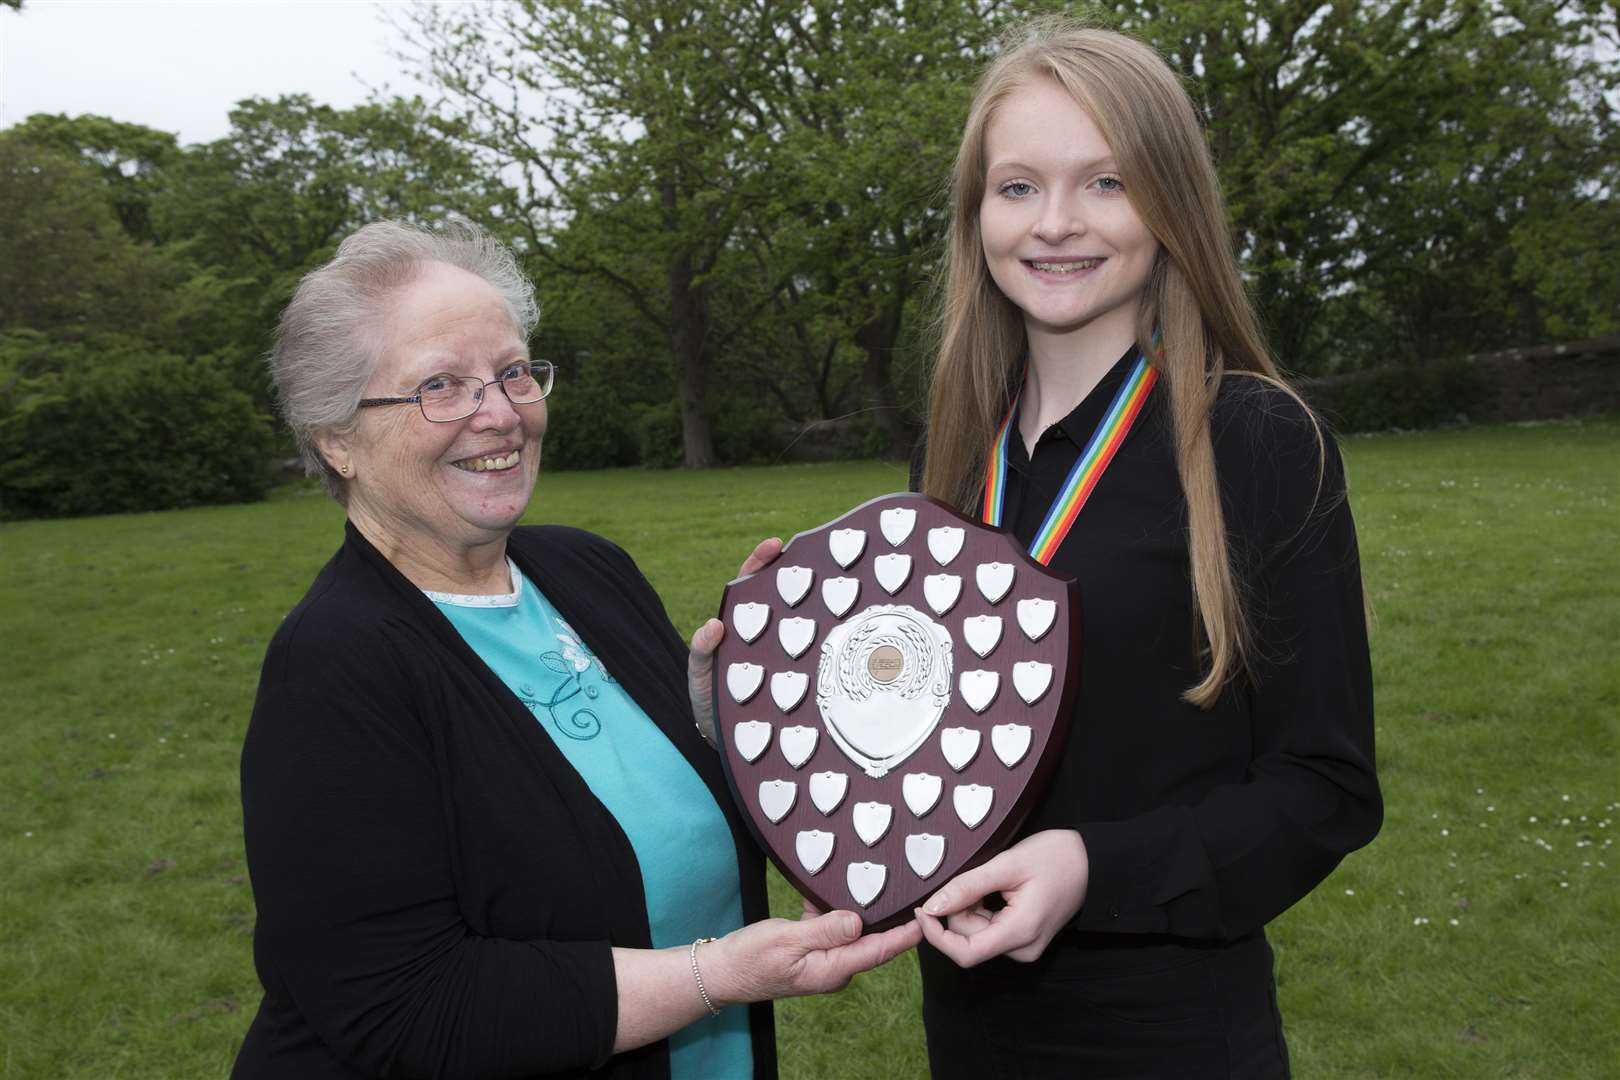 Three years ago Sheila Lewry donated a shield to the festival for woodwind solo grade 5 and 6. This year she had the pleasure of presenting it to her granddaughter, Morag Mackay, Thurso High School, who was winning it for the first time.